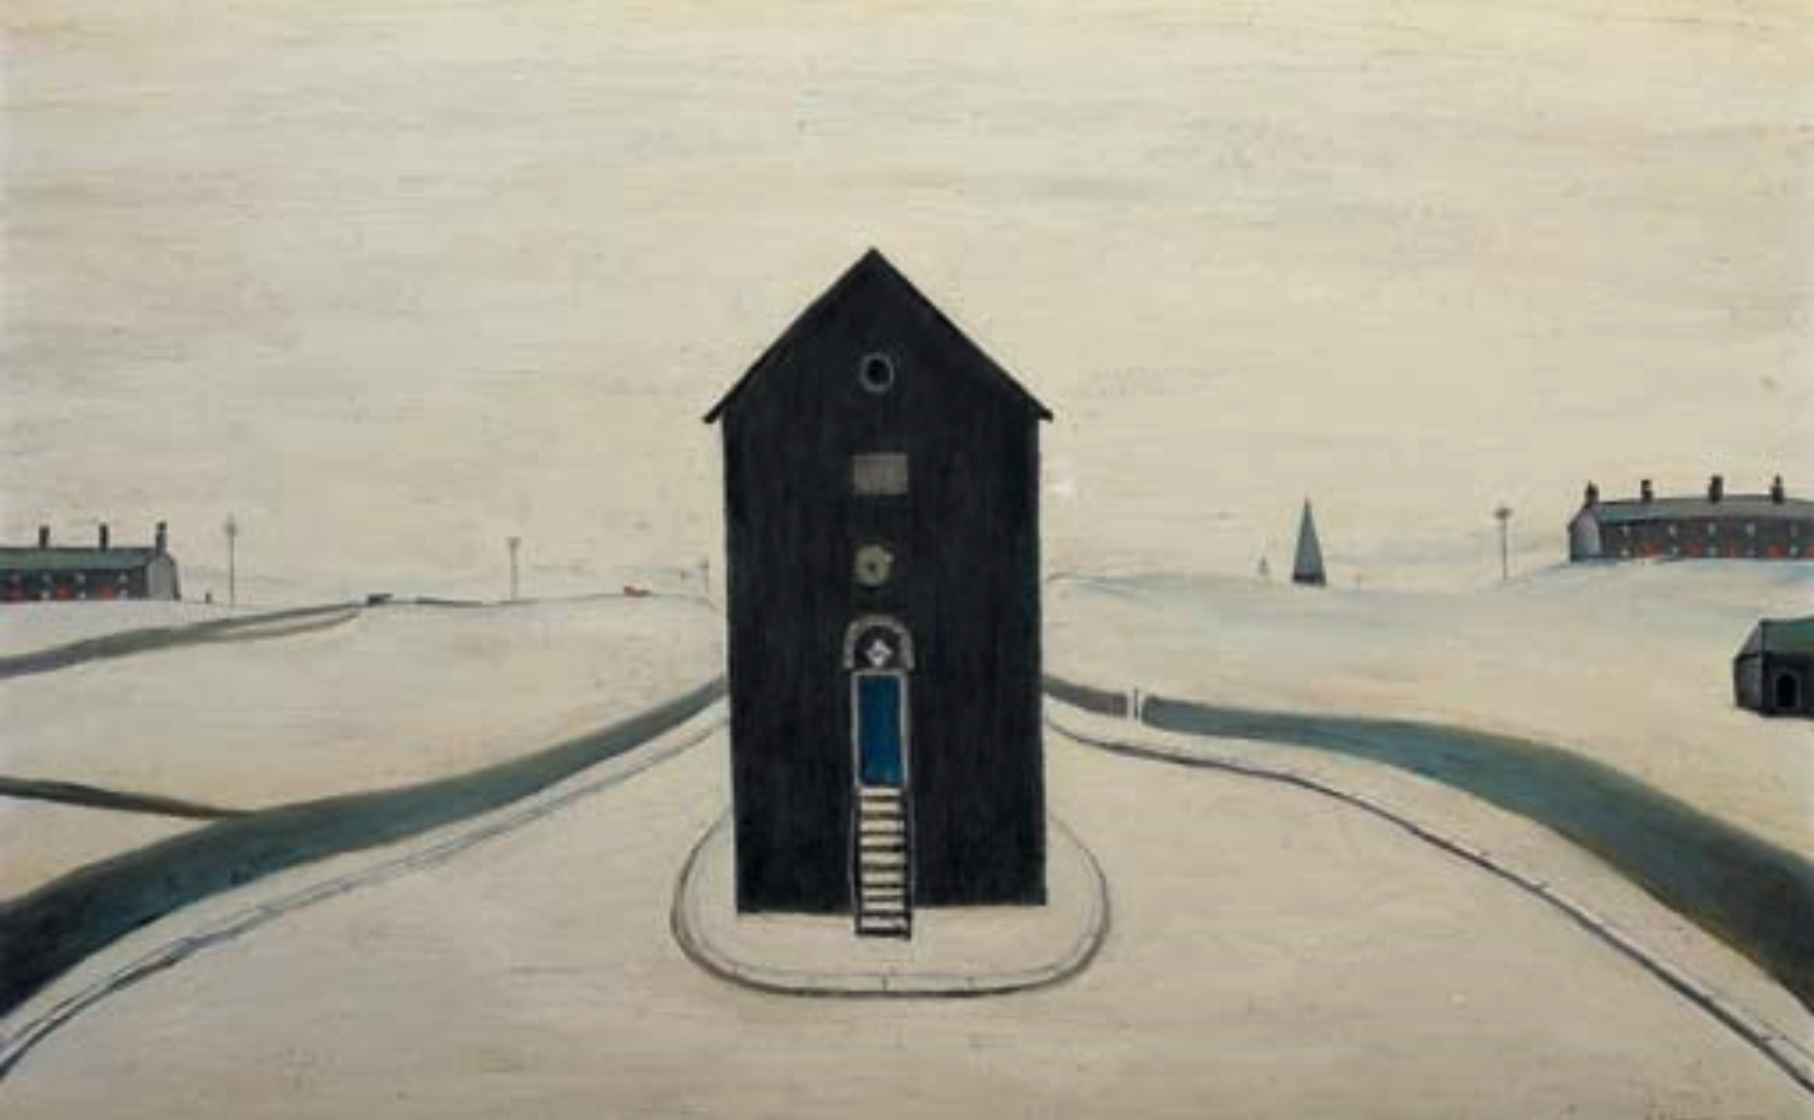 The Old Toll House on the Moors (1959) by Laurence Stephen Lowry (1887 - 1976), English artist.